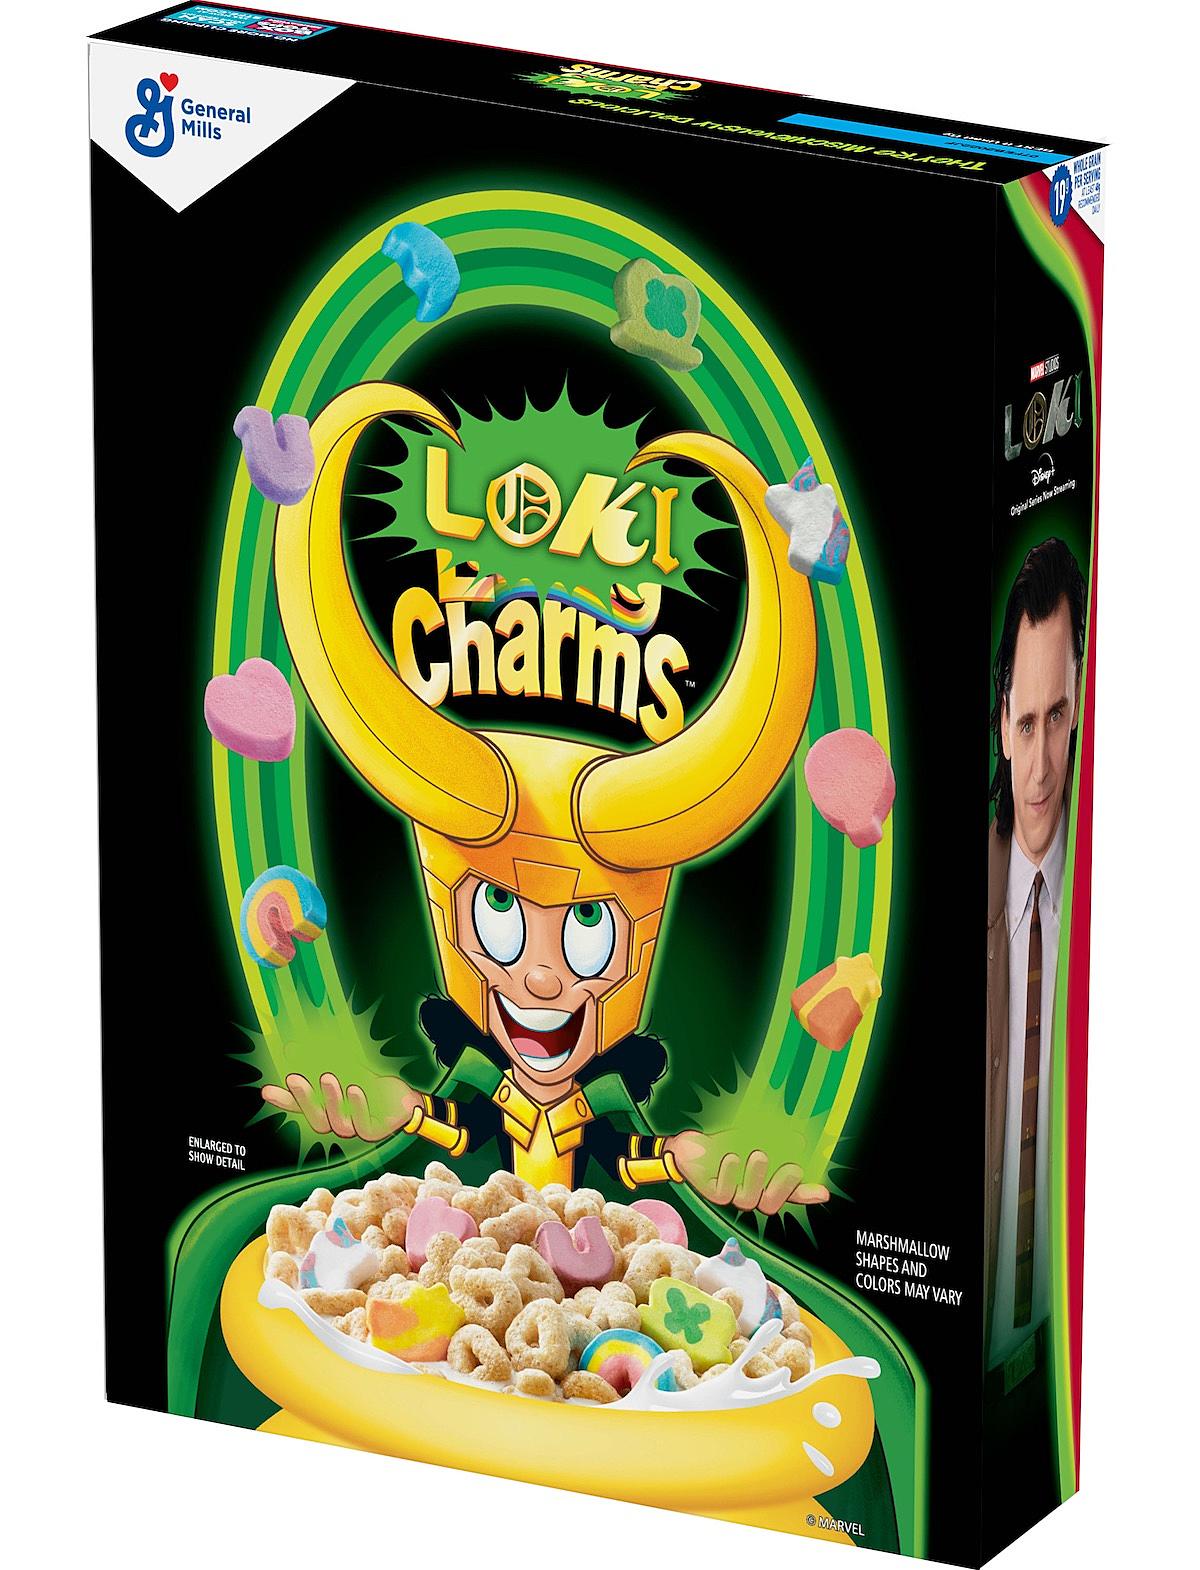 Lucky Charms Still Have Artificial Ingredients